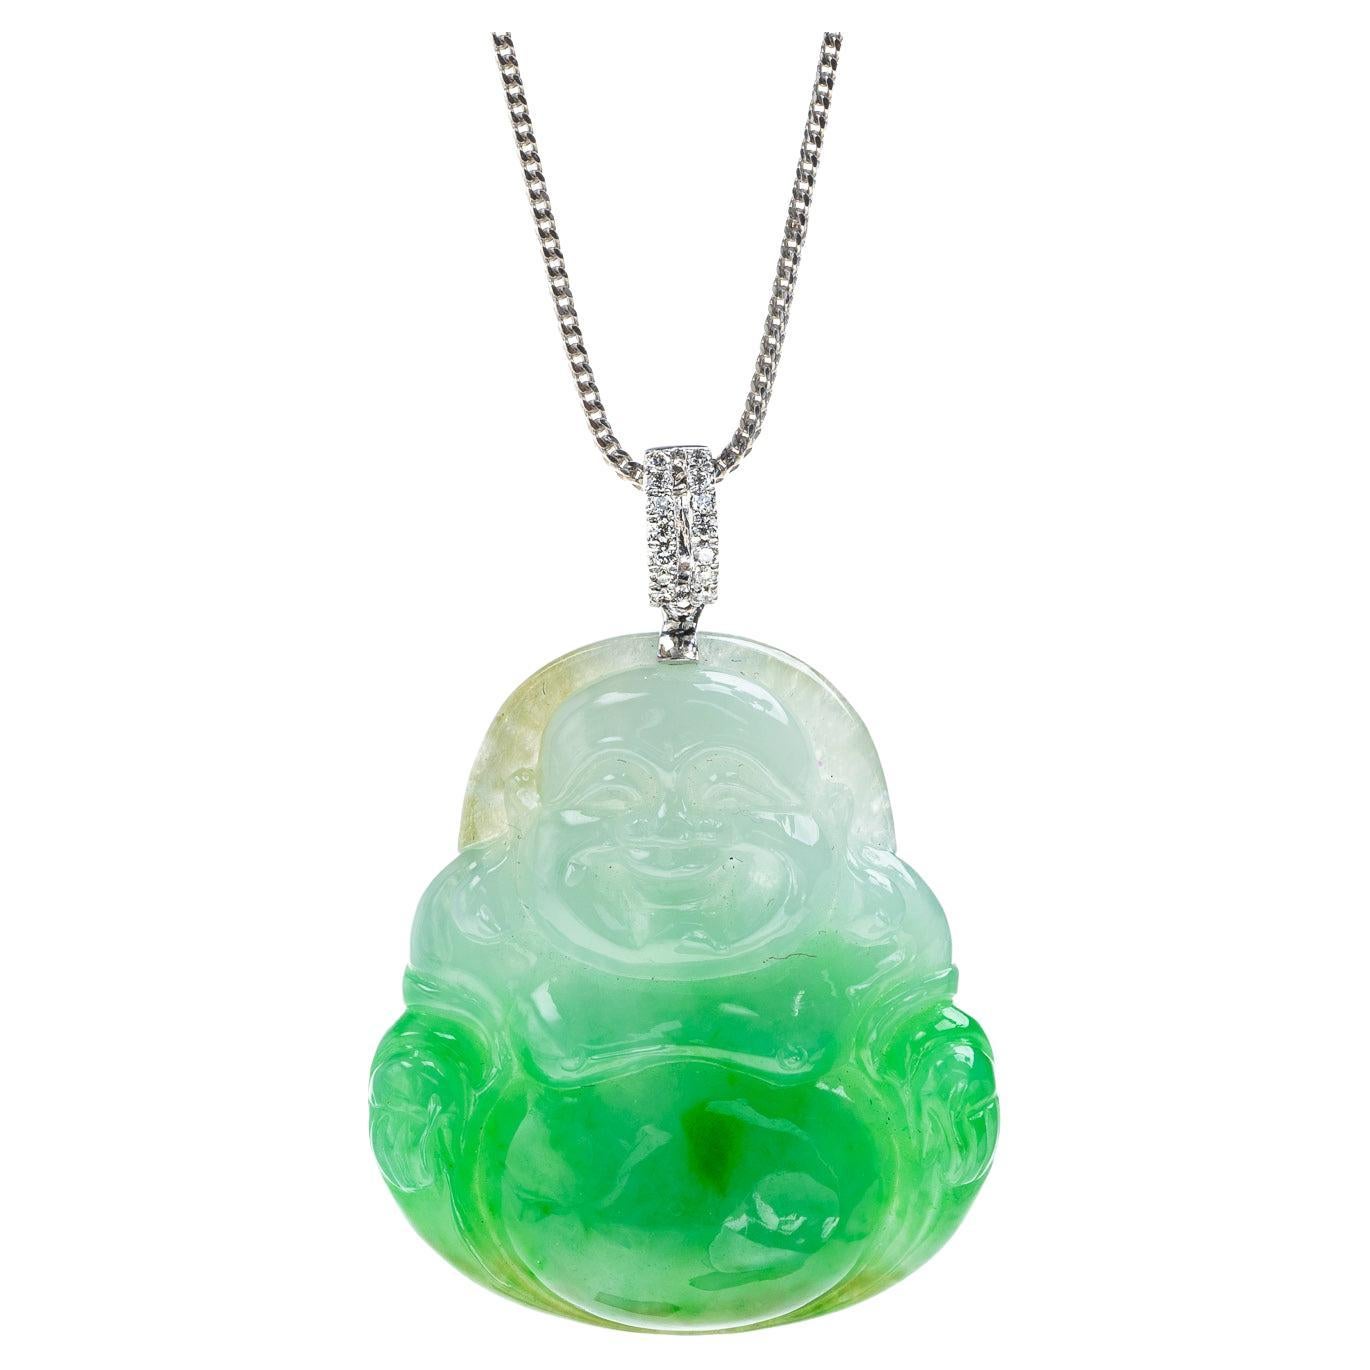 Handcrafted knot work adjustable green jade "Happy Buddha" pendant necklace